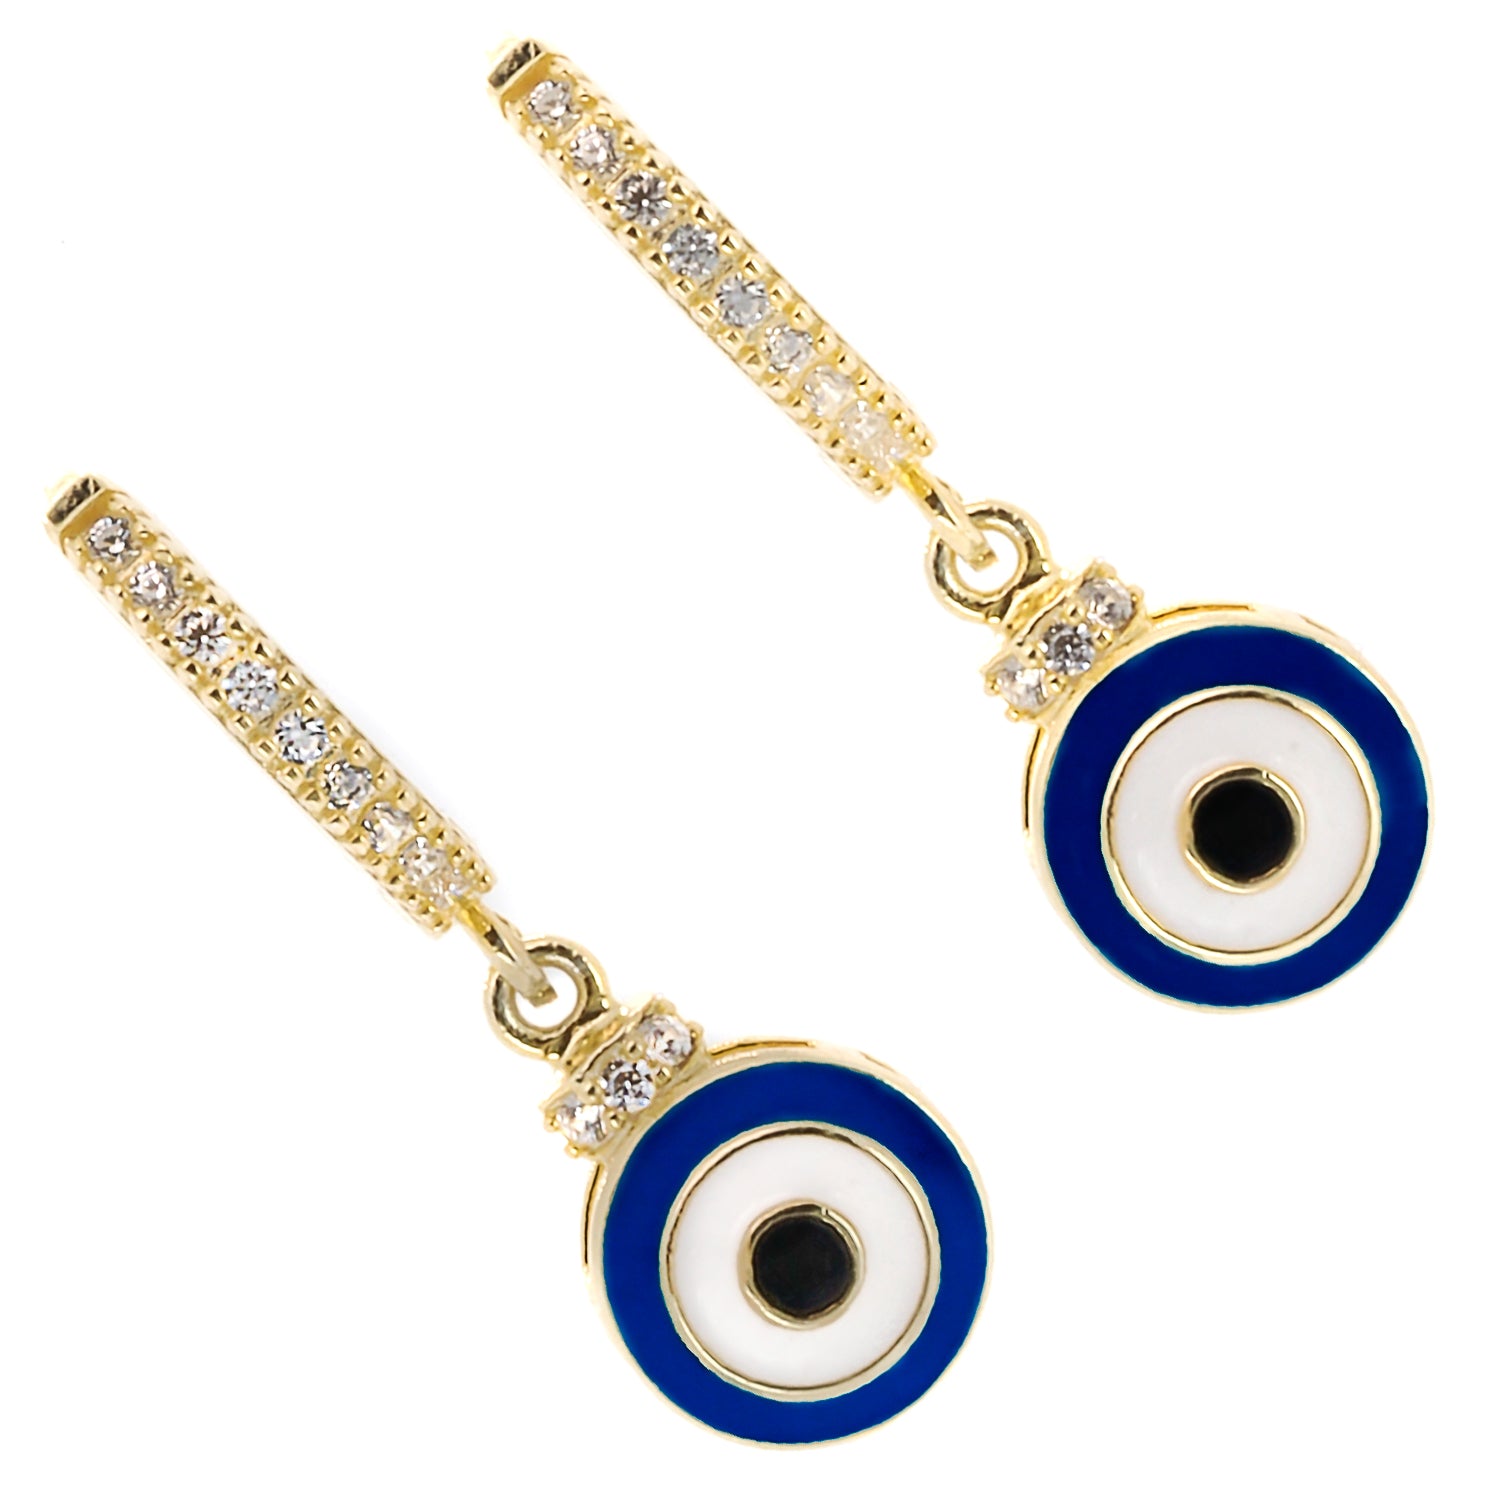 Eye-catching Blue Evil Eye Gold Earrings with intricate details